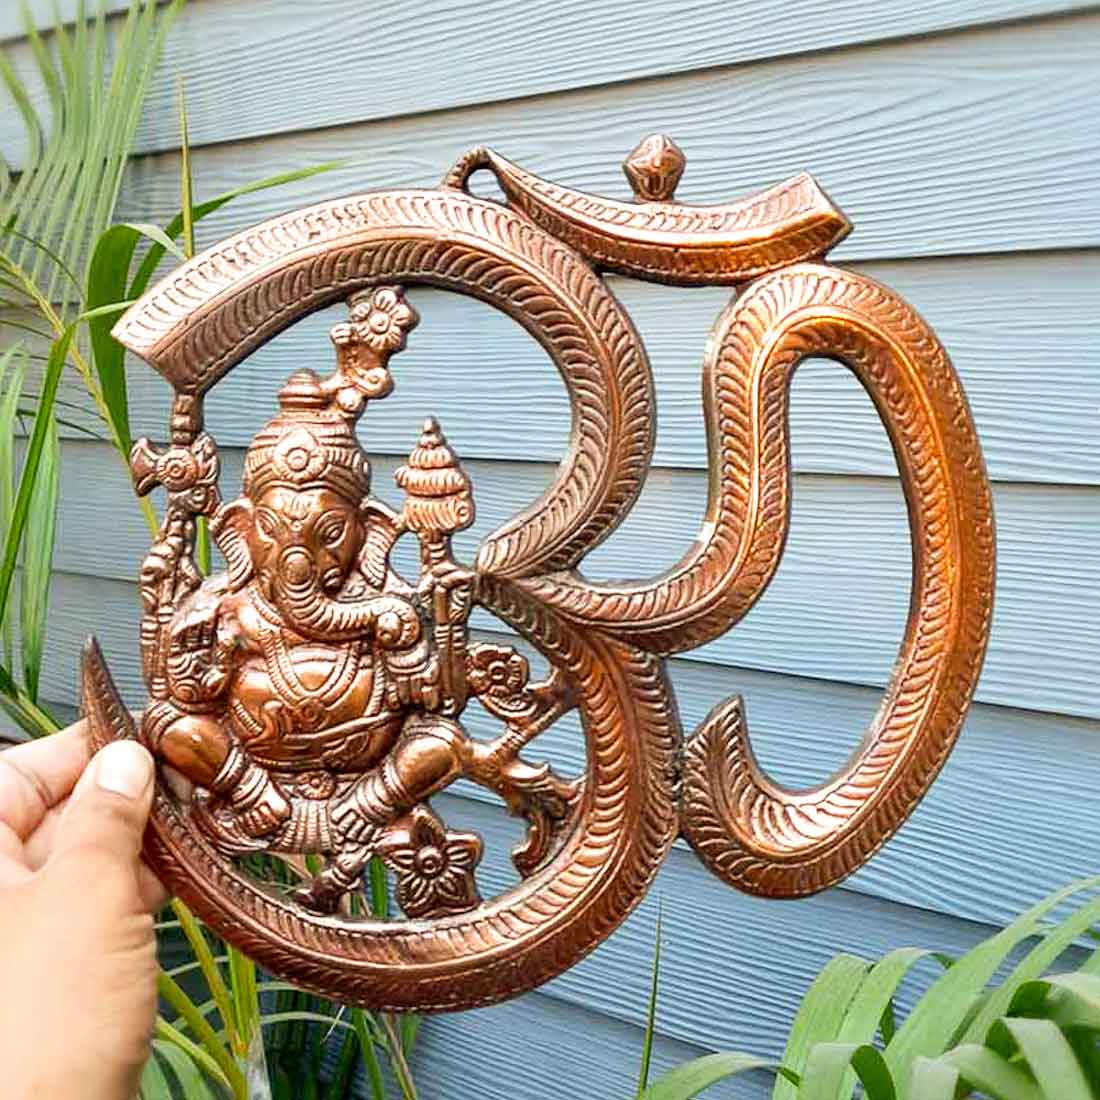 Ganesh Wall Hanging Murti | Ganesha With Om Wall Idol Decor - for Entrance Door | Ganesha Statue Hangings - for Home, Puja, Temple, Religious Decor & Gift - 10 Inch